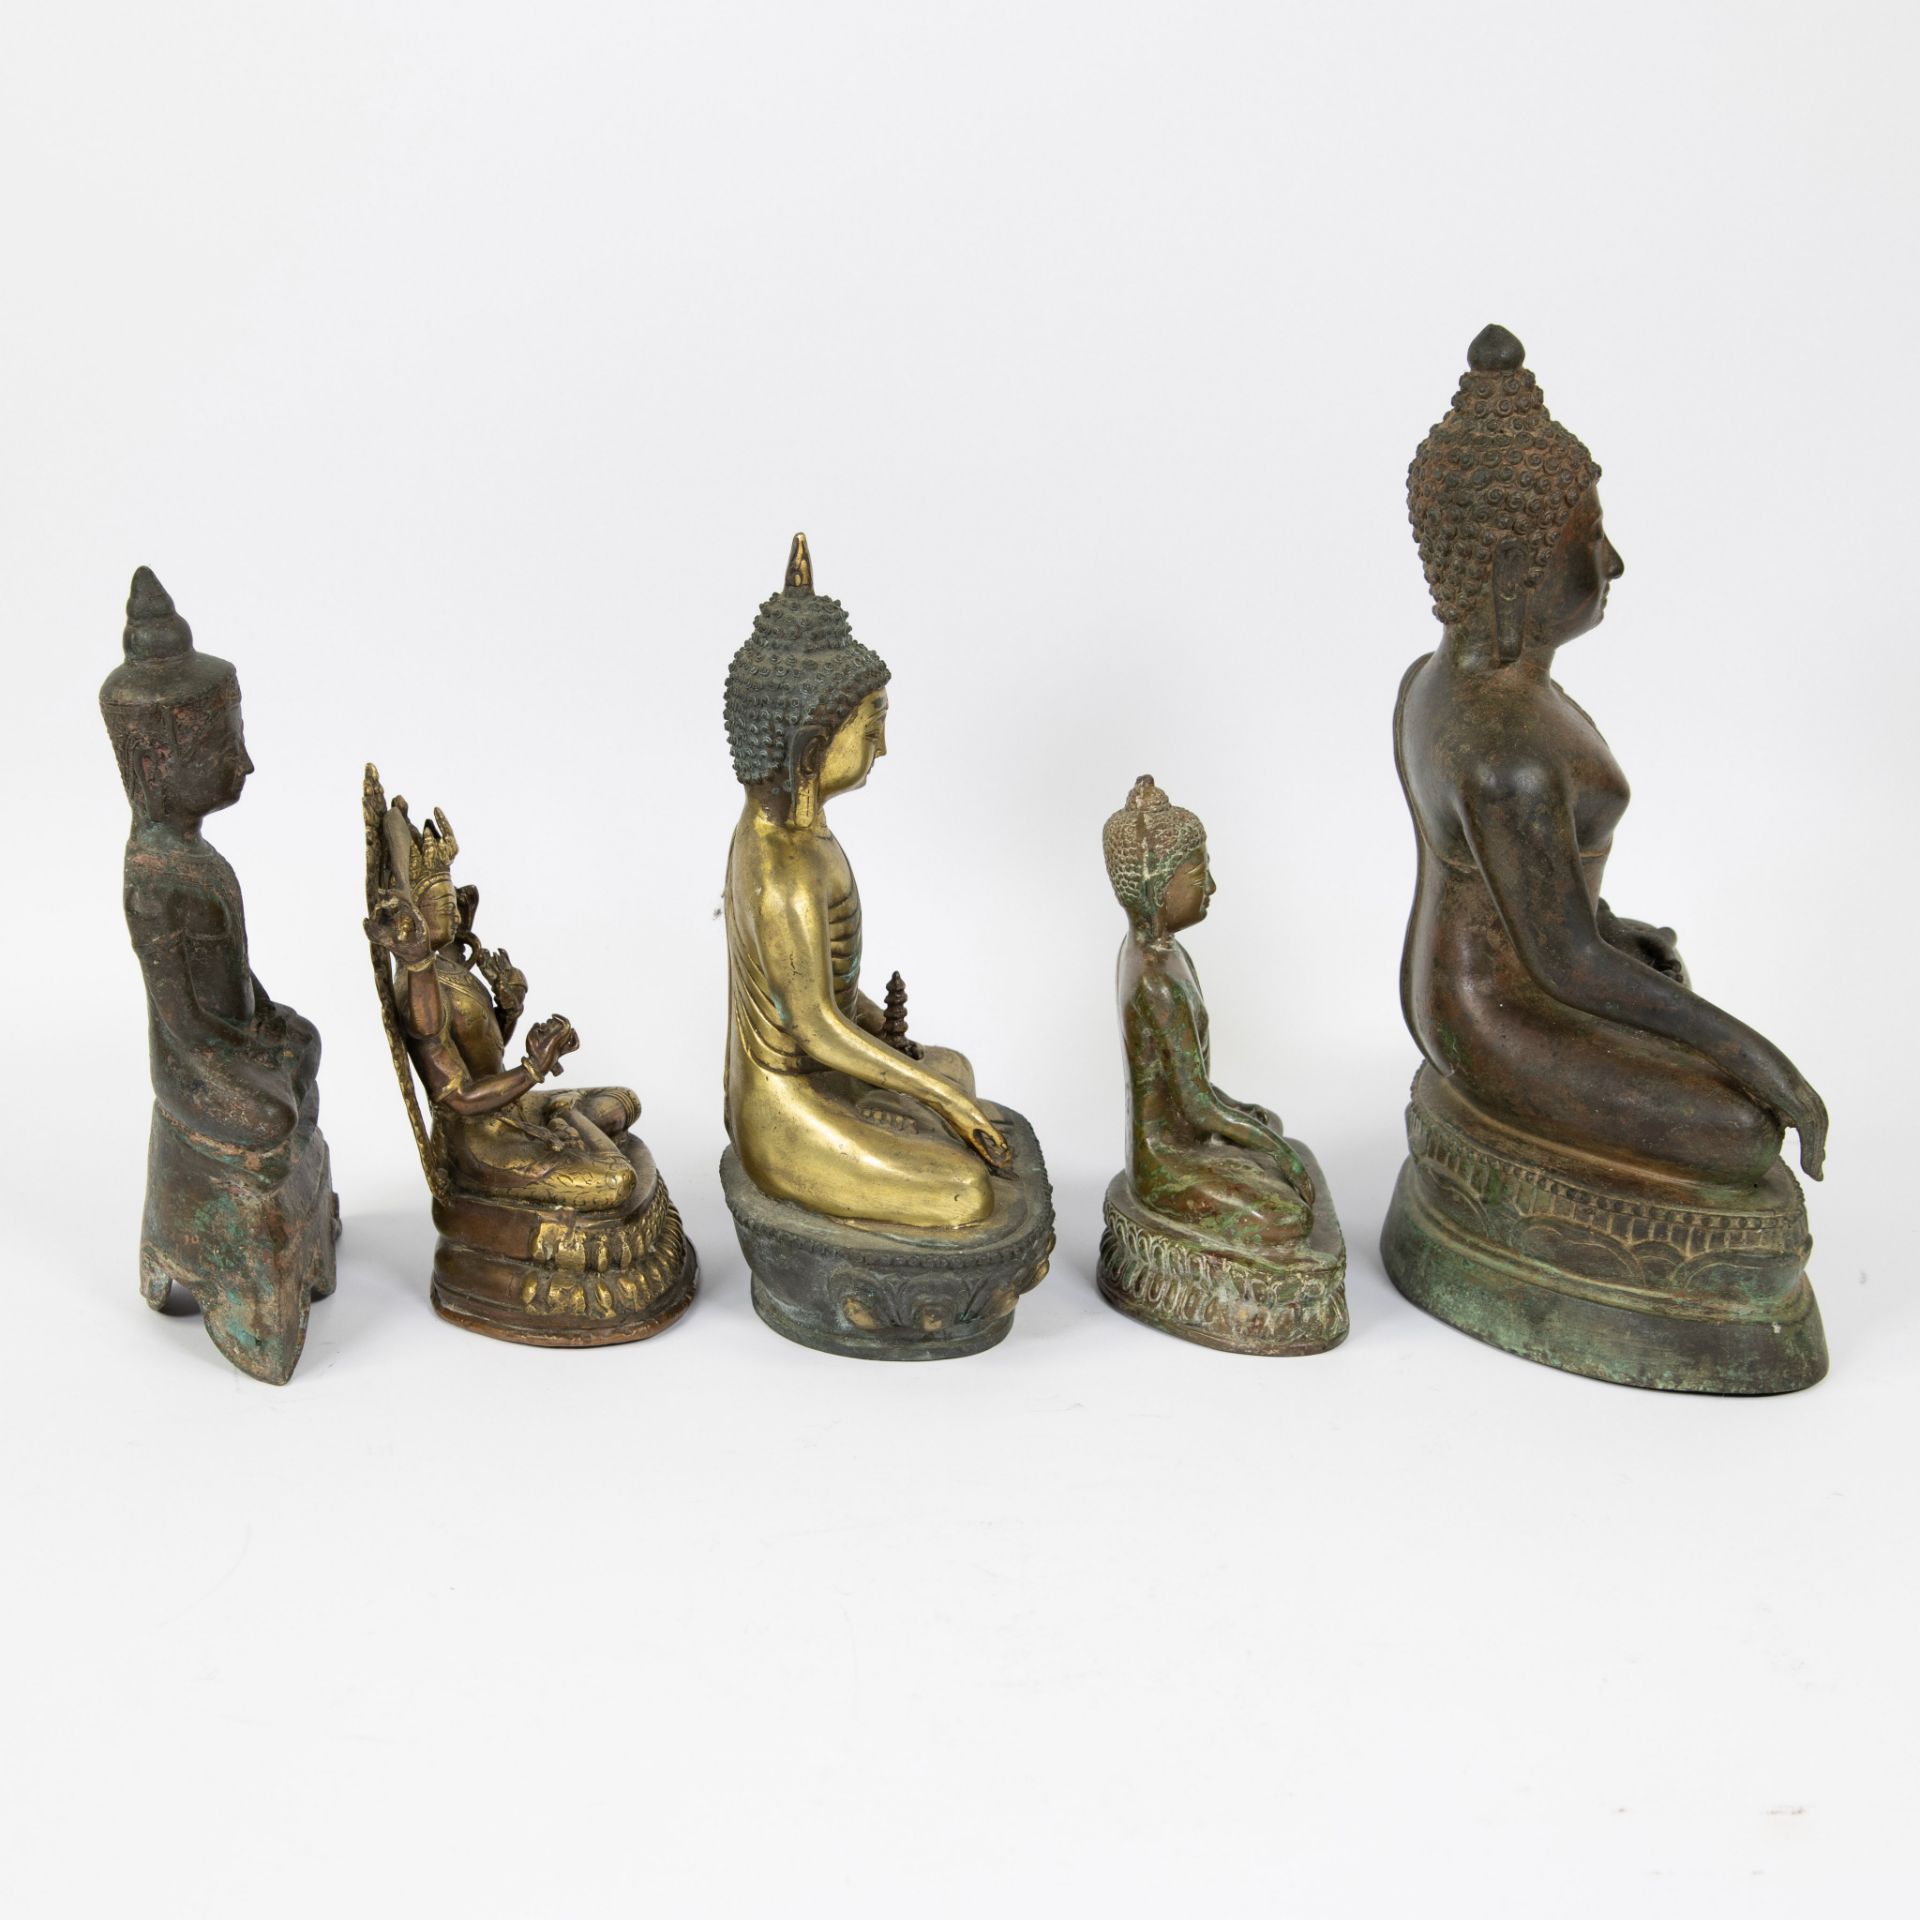 Collection of 5 Buddhas, Thailand - Image 4 of 5